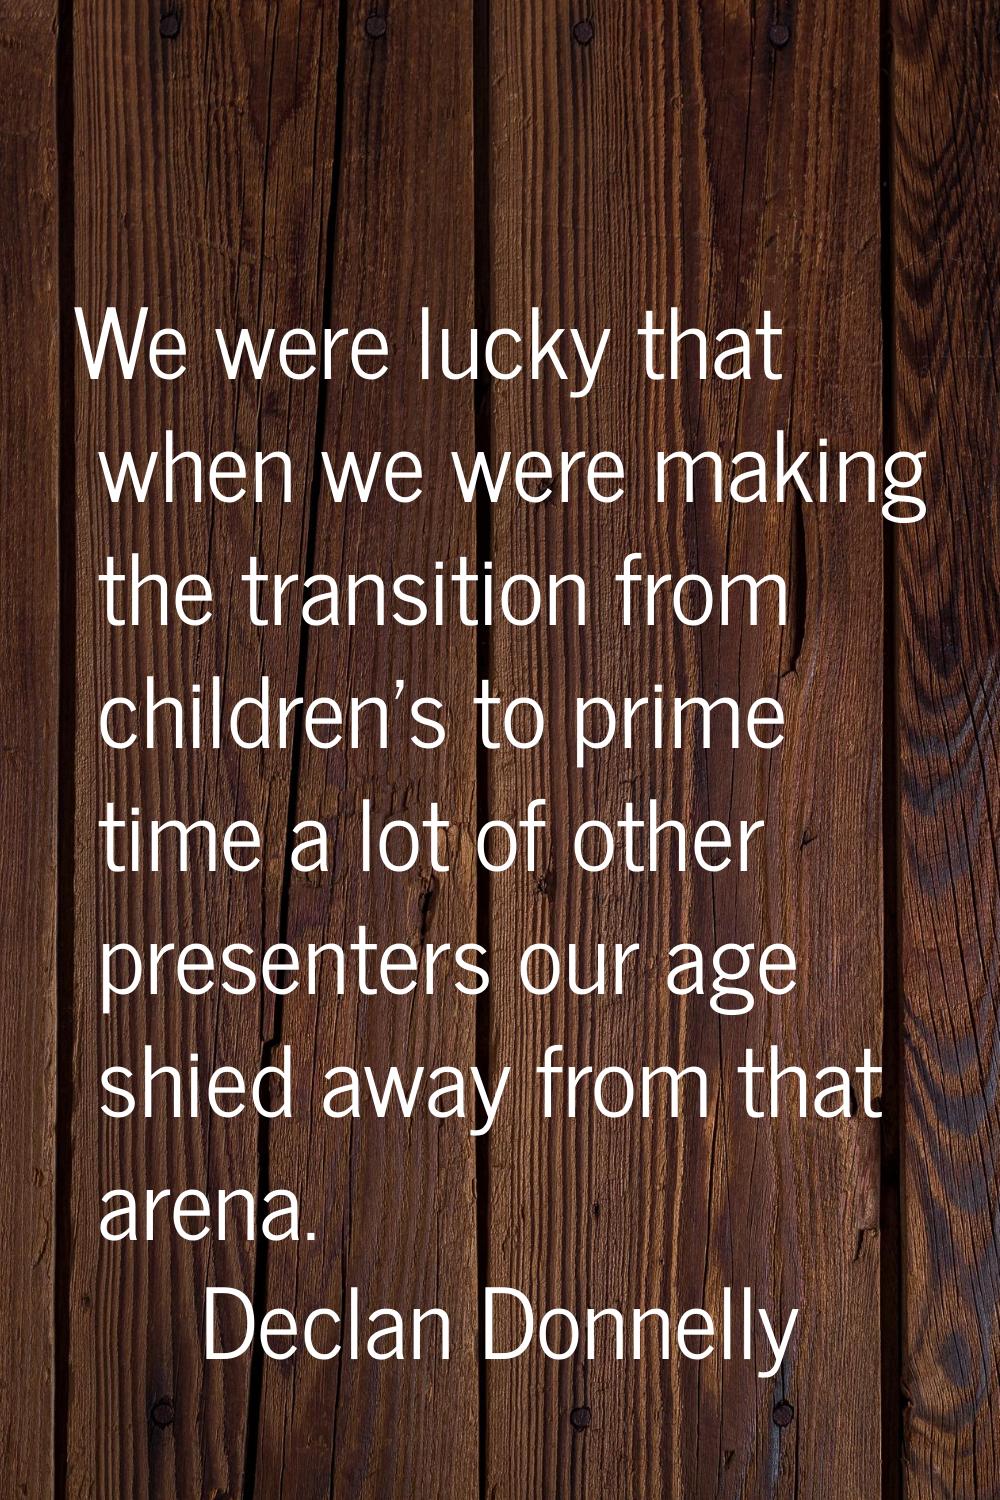 We were lucky that when we were making the transition from children's to prime time a lot of other 